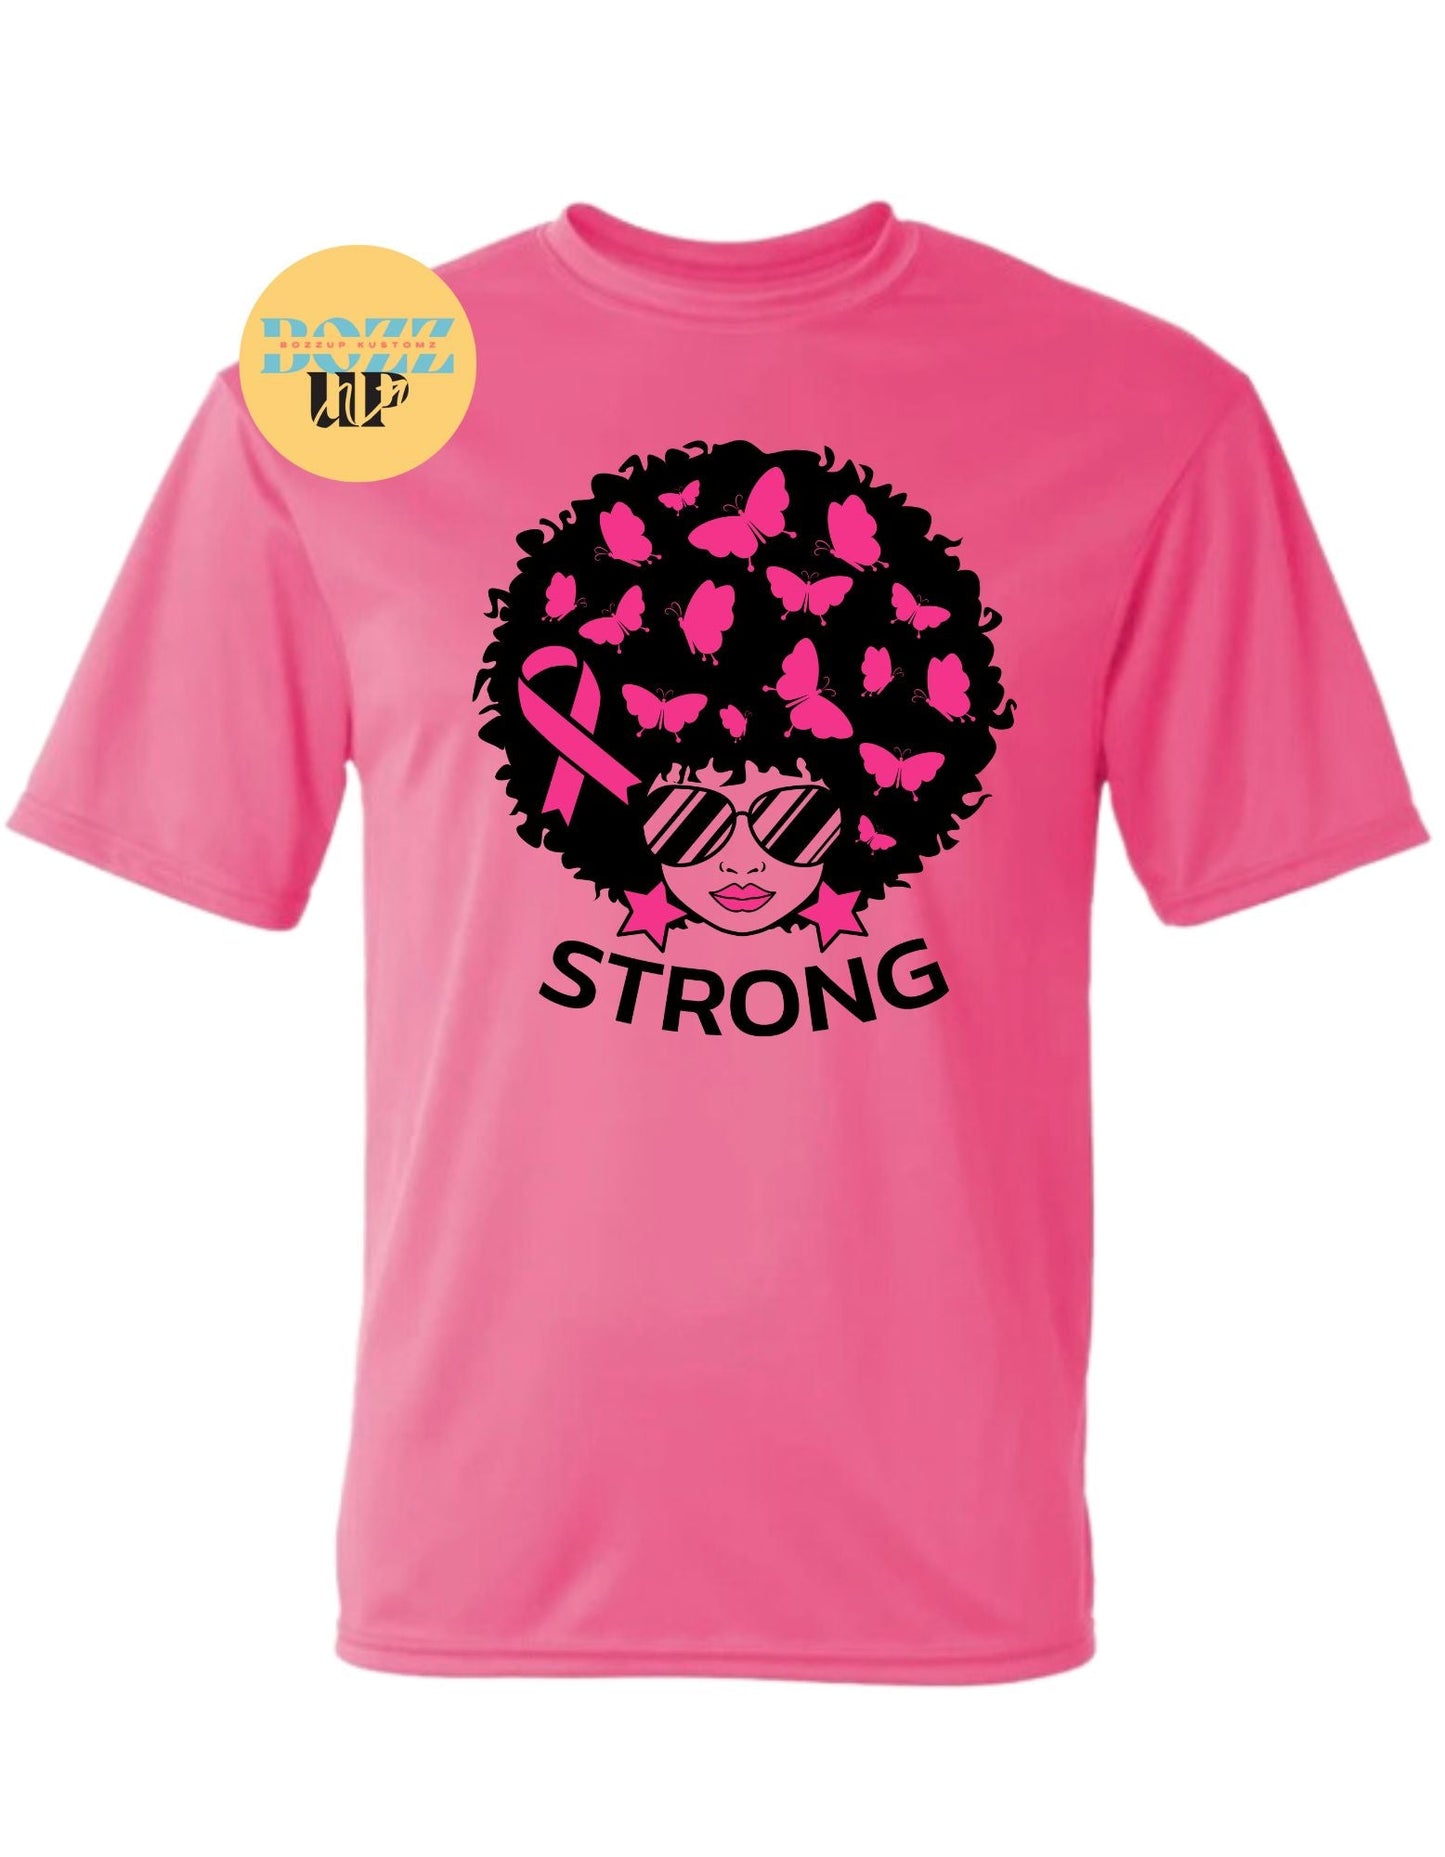 Strong-Breast Cancer Shirts-Afro Woman - BozzUp Kustomz